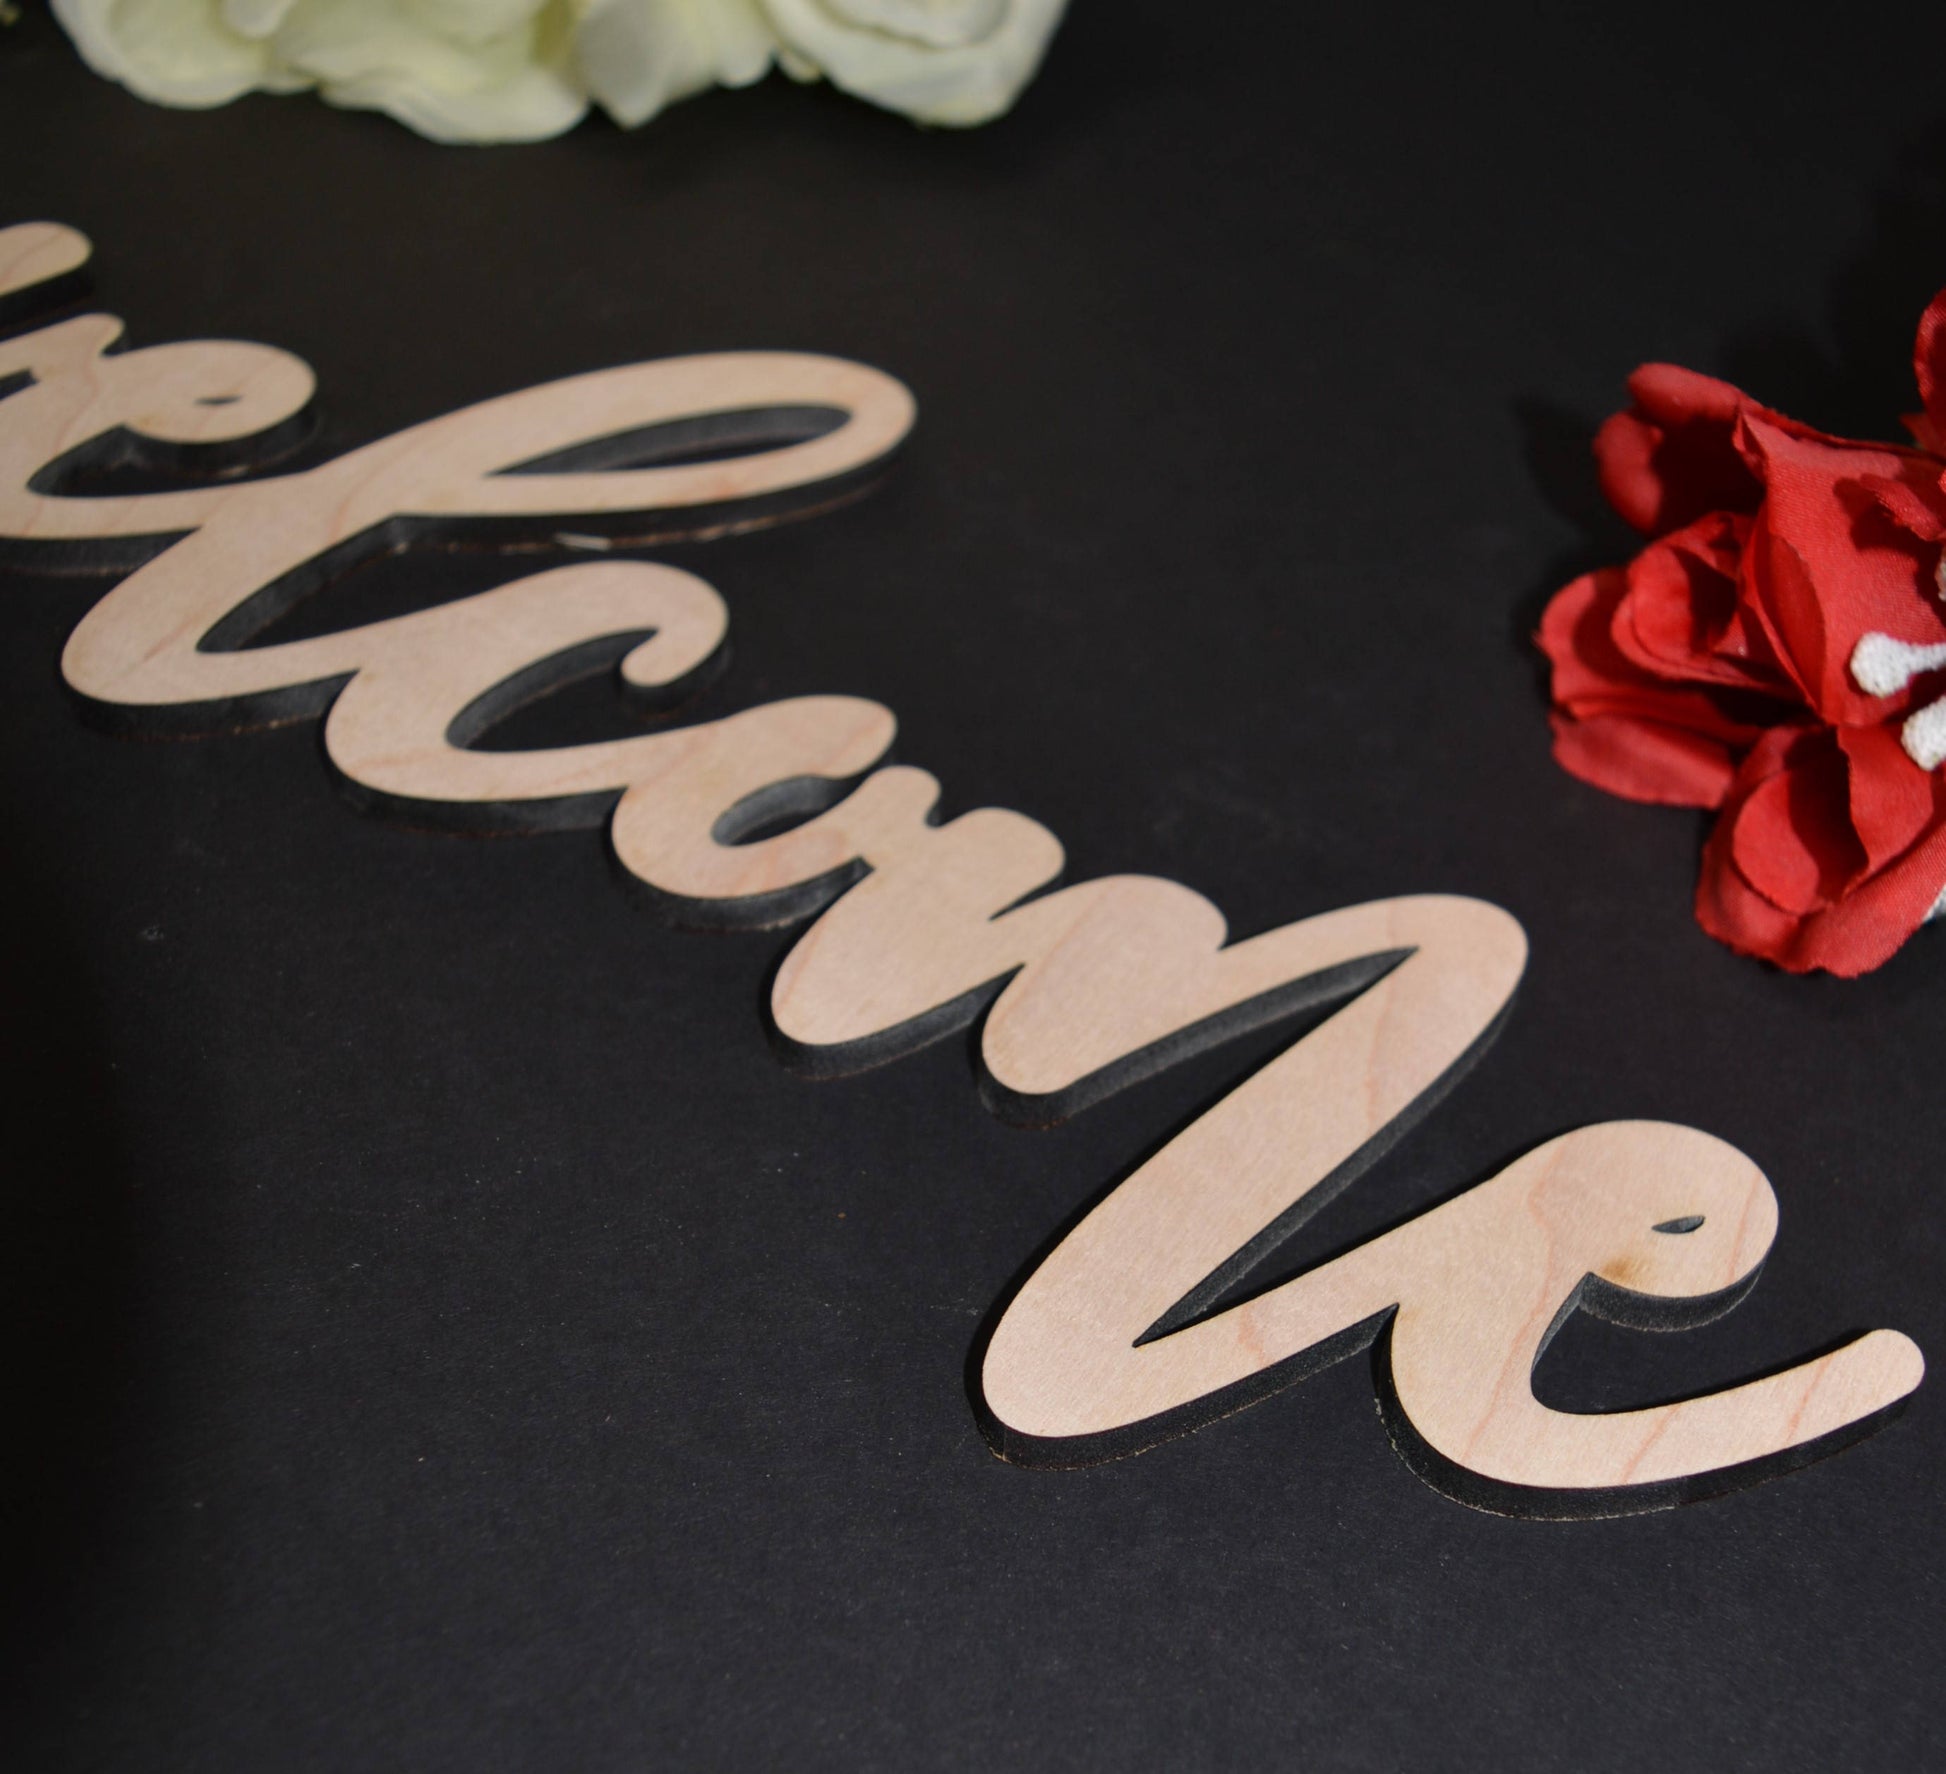 WELCOME wood sign Laser cut. Calligraphy WELCOME Wall Sign. WELCOME wood cut out. Rustic Wood Sign. Wood Welcome Word Sign. Wood Letter Sign